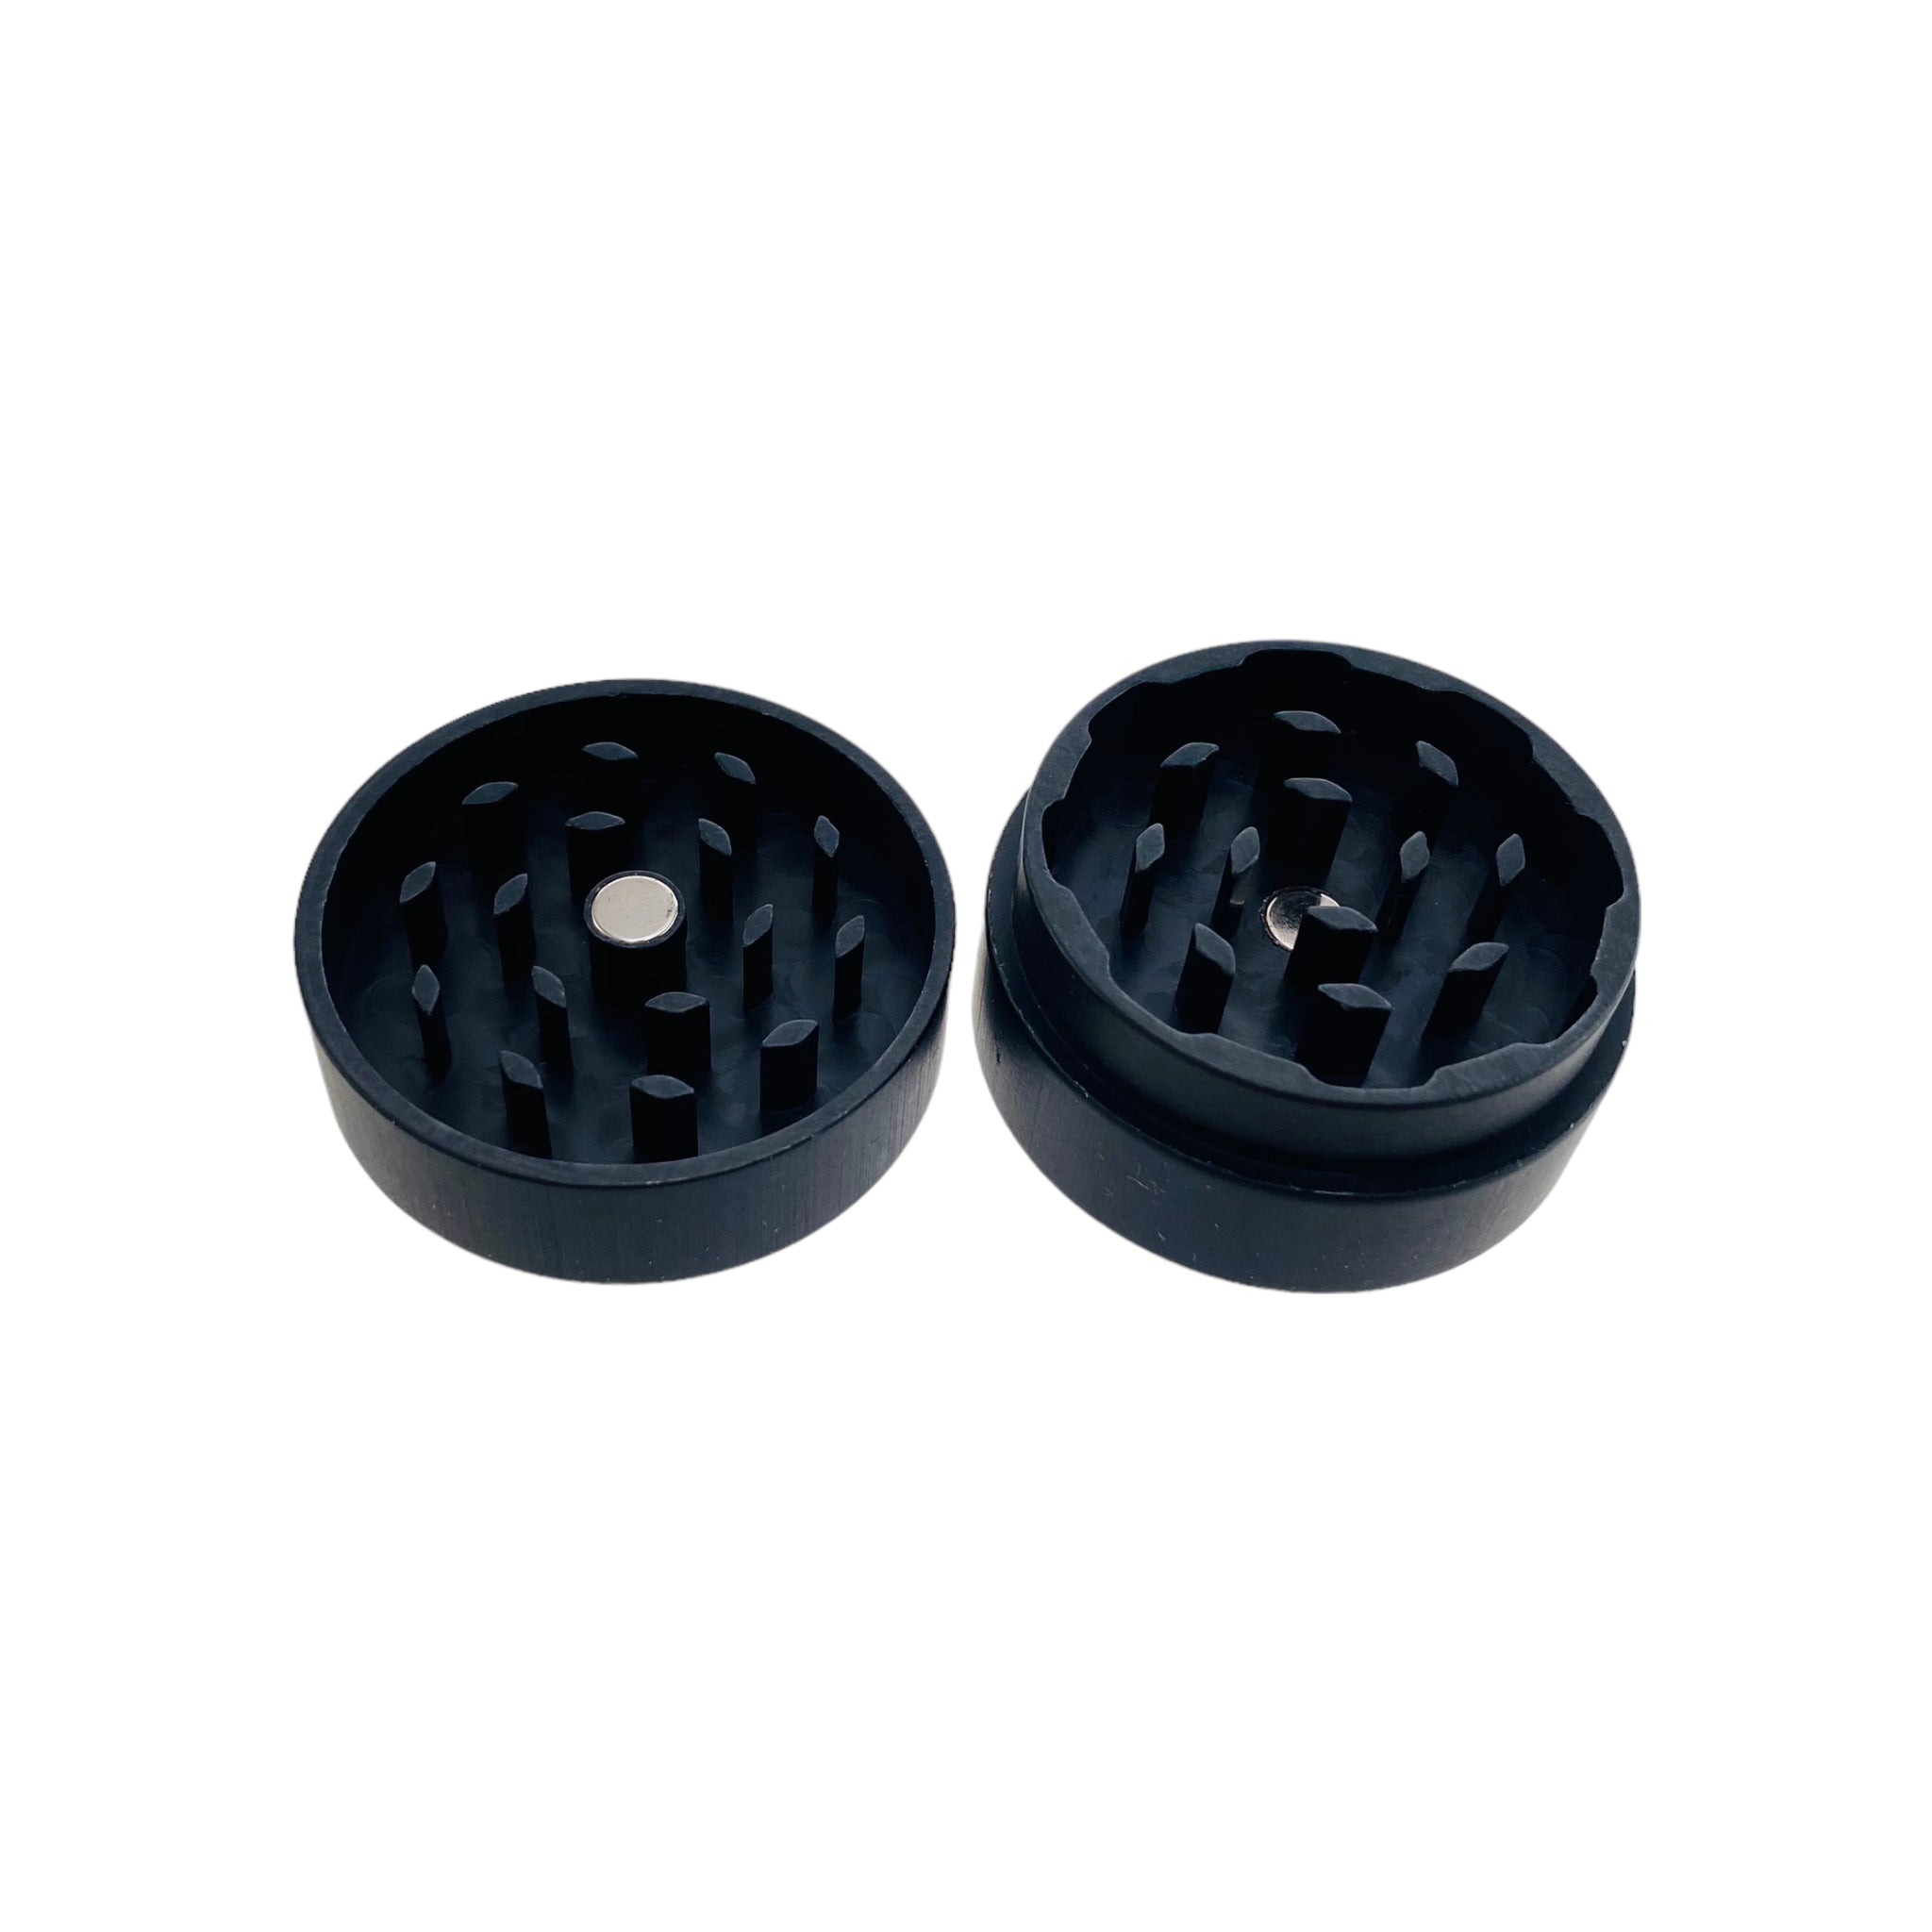 Tahoe Grinders - Black Anodized Aluminum Small Two Piece Herb Grinder With Sacred Geometry